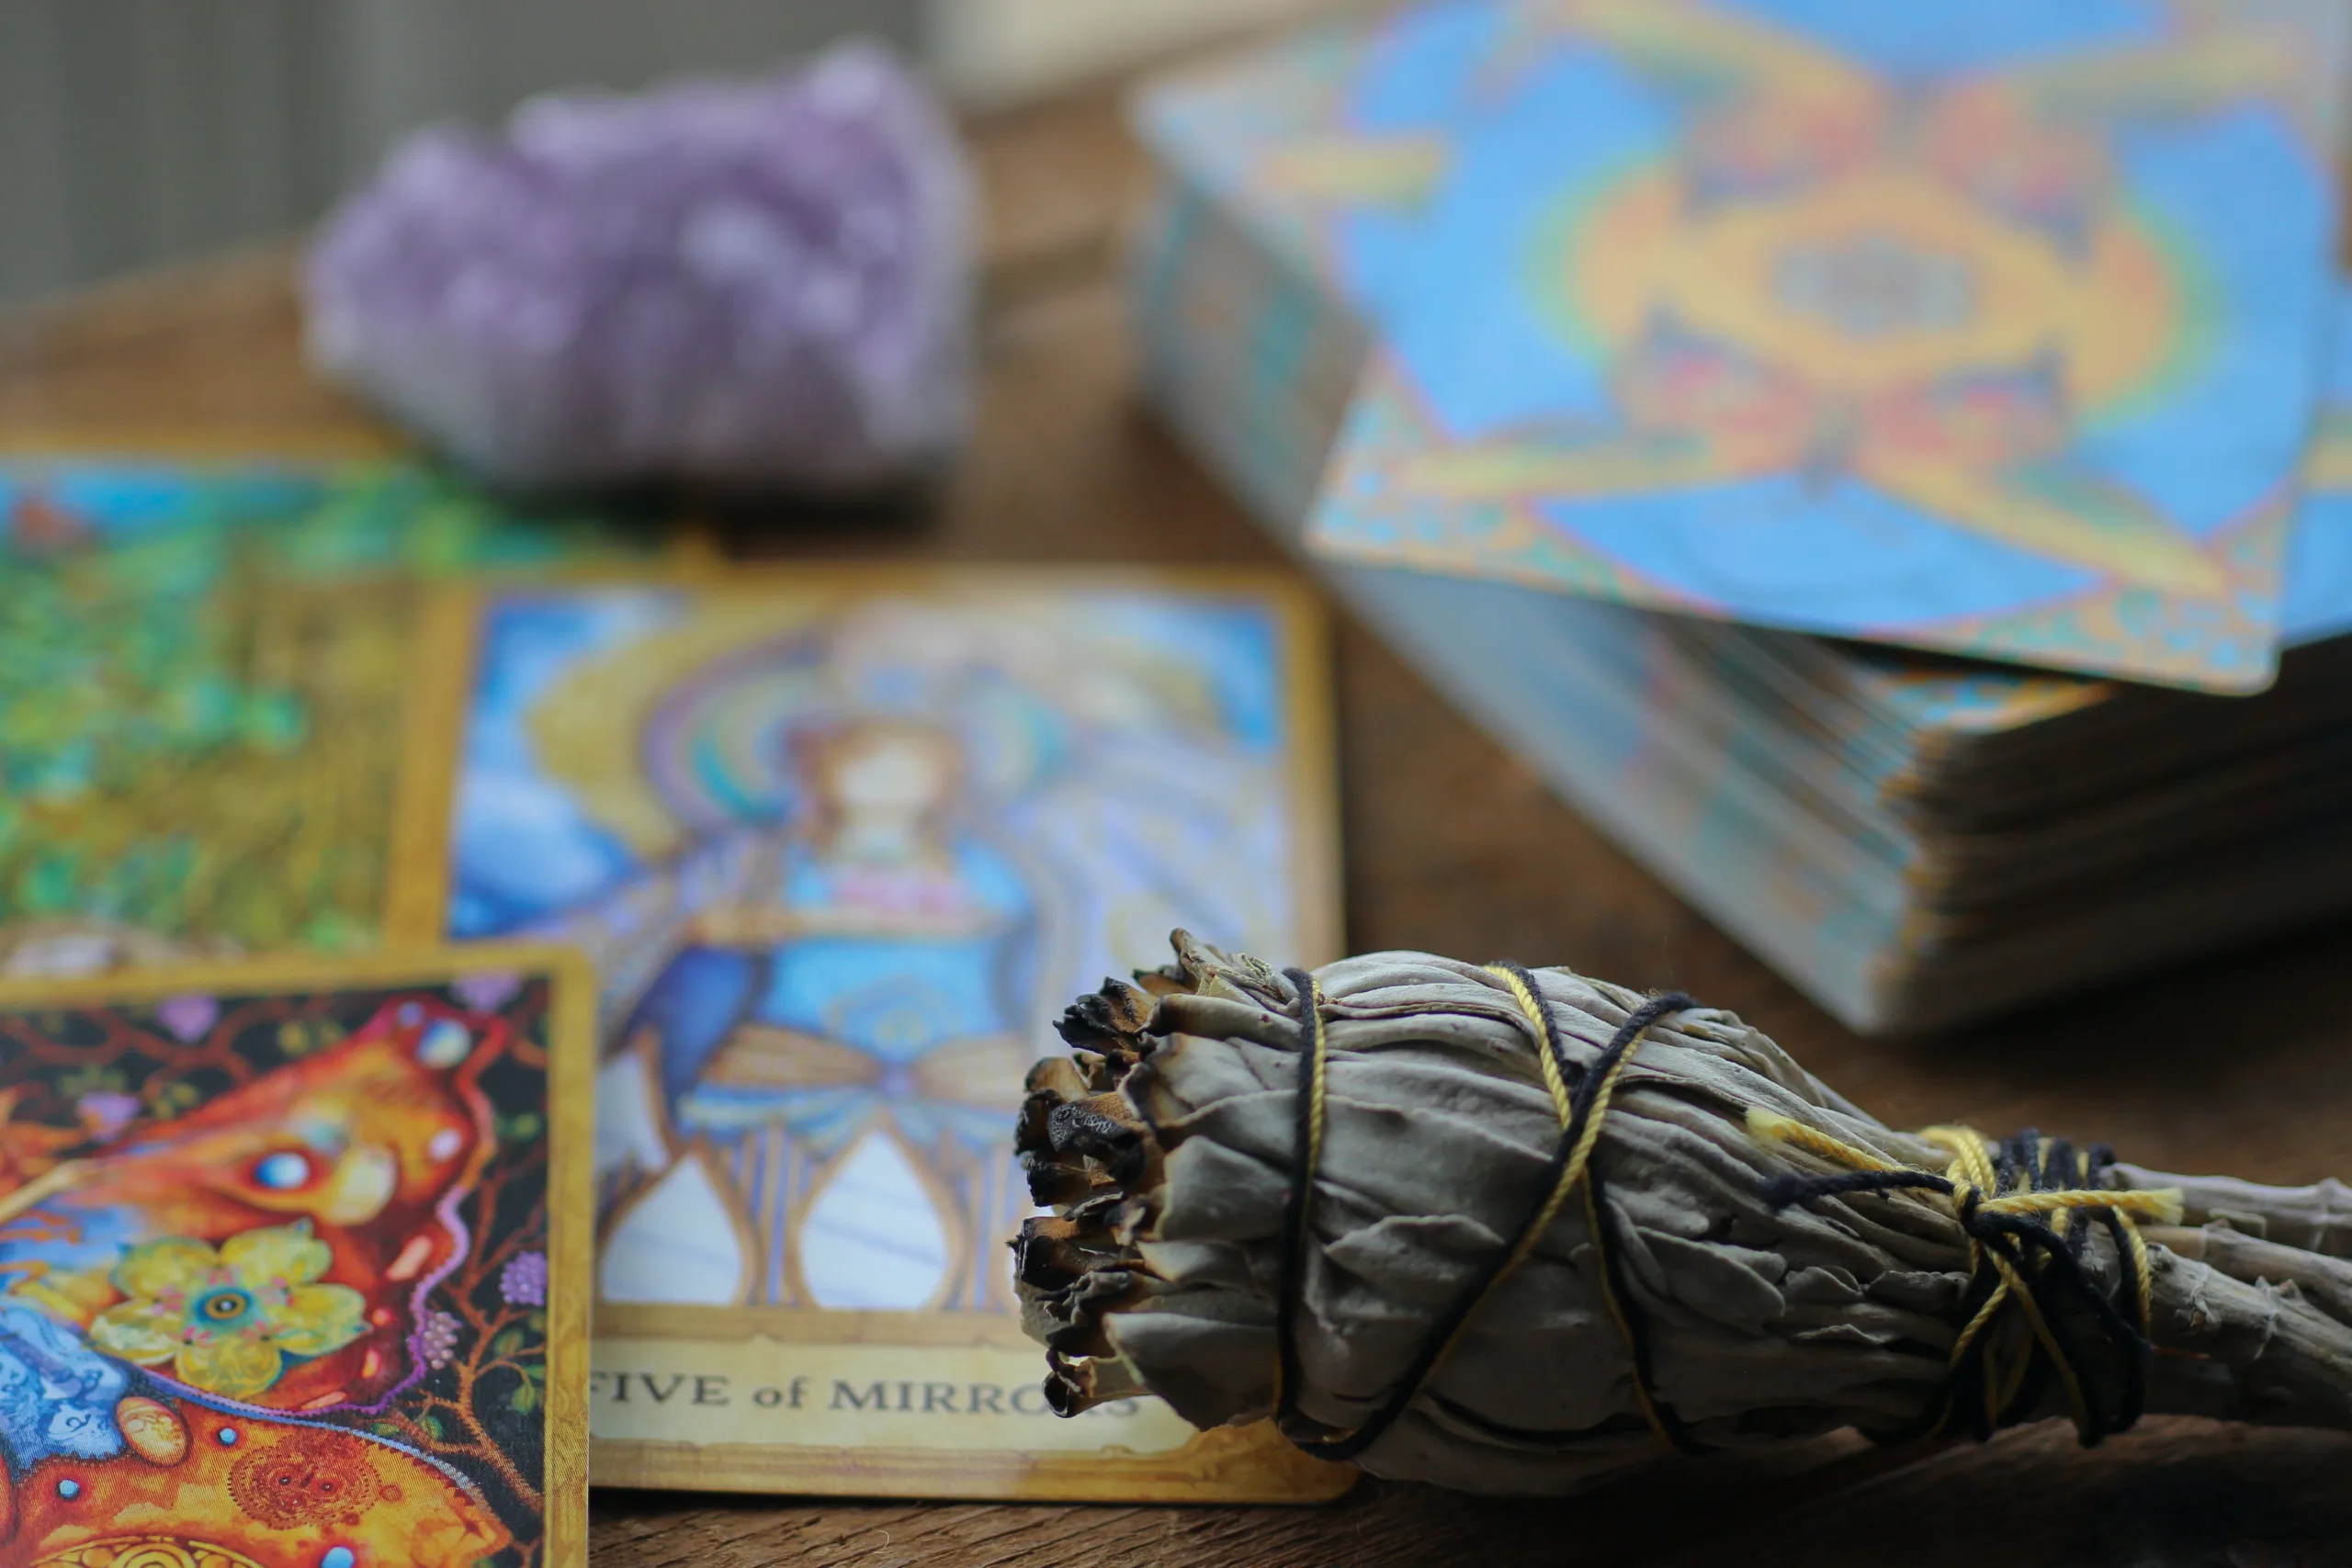 What tarot cards represent twin flames?